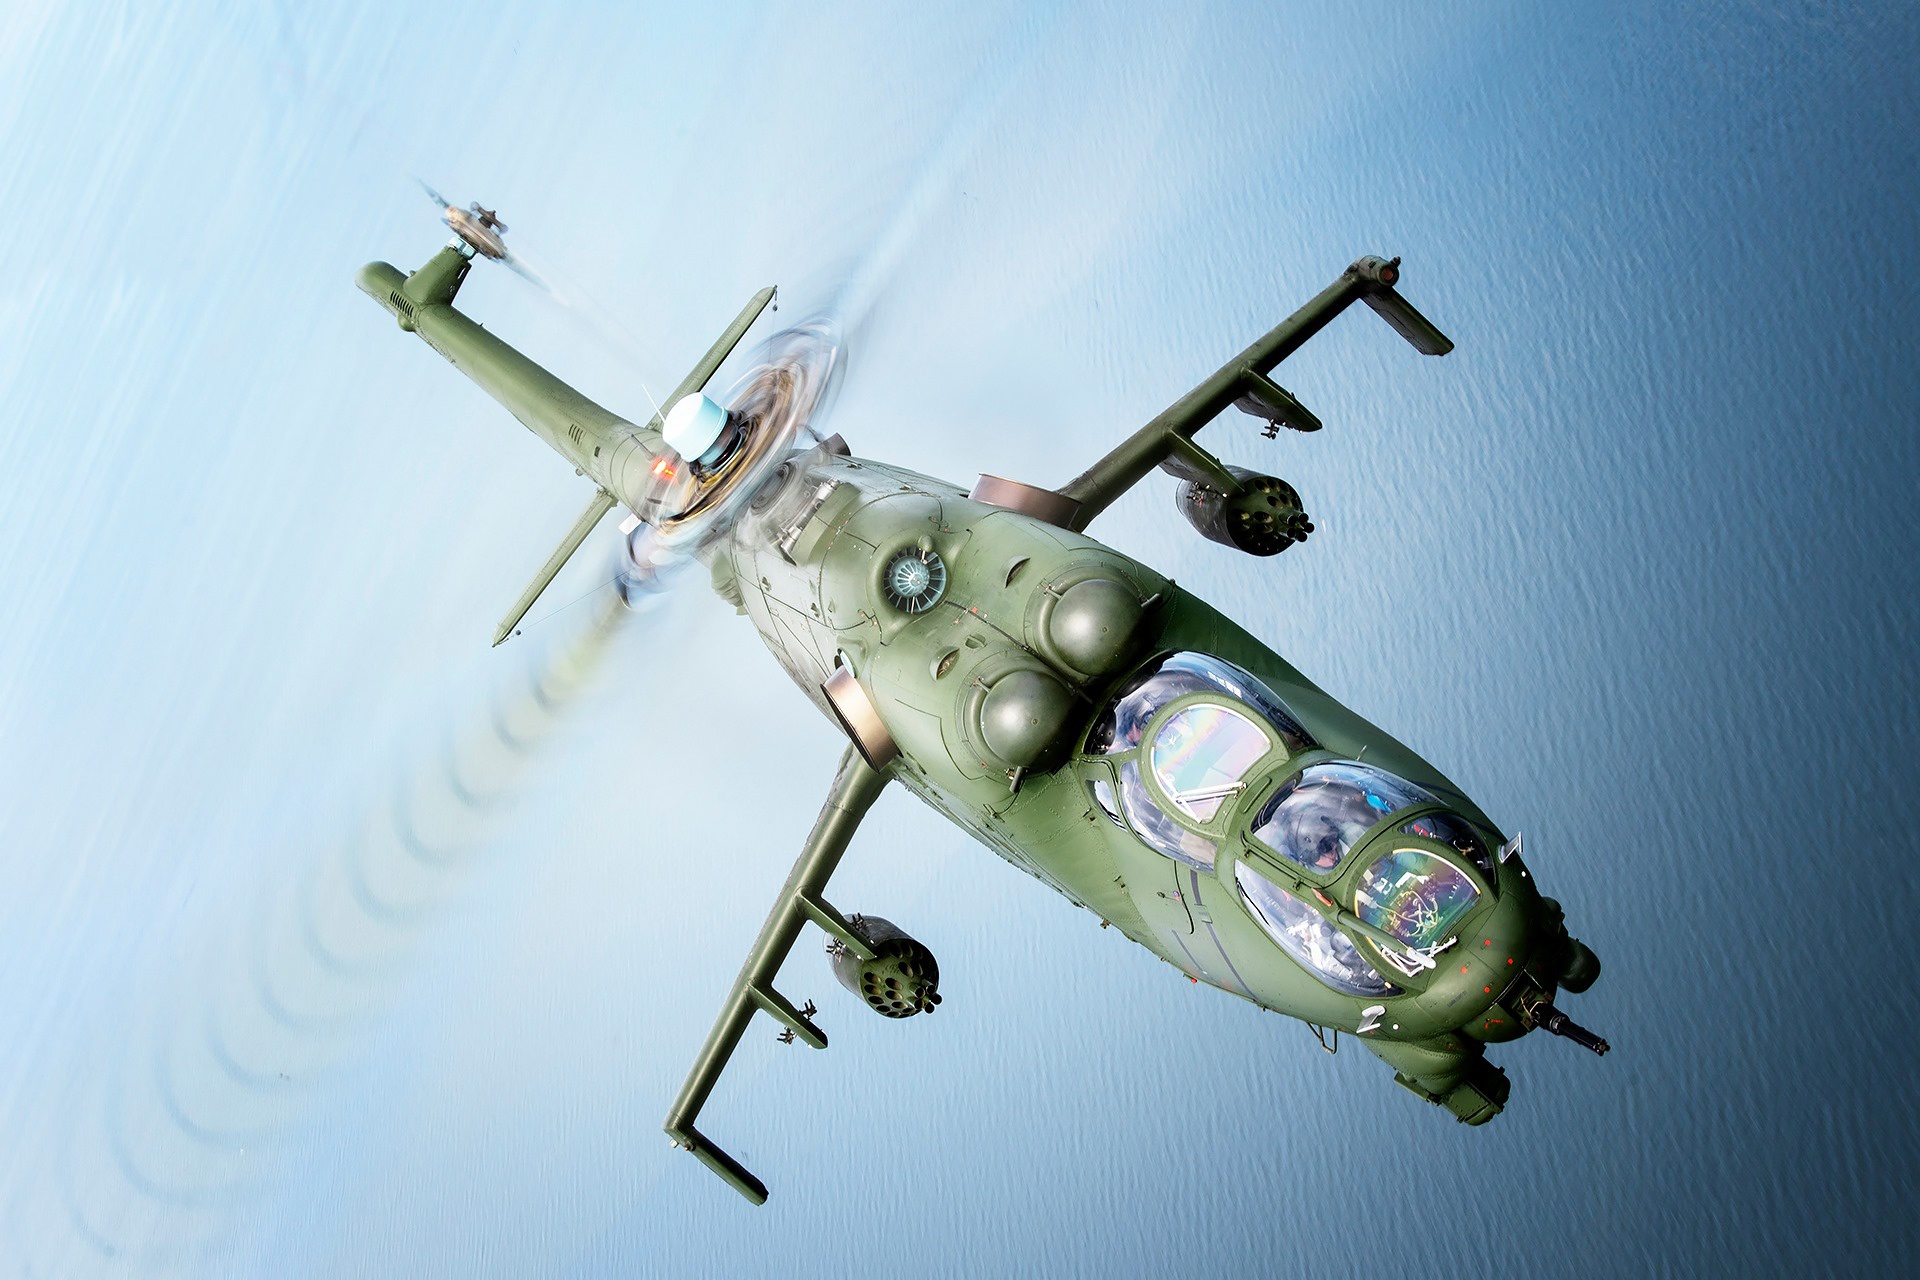 General 1920x1280 aircraft helicopters military military aircraft vehicle Mil Mi-24 Russian/Soviet aircraft Mil Helicopters